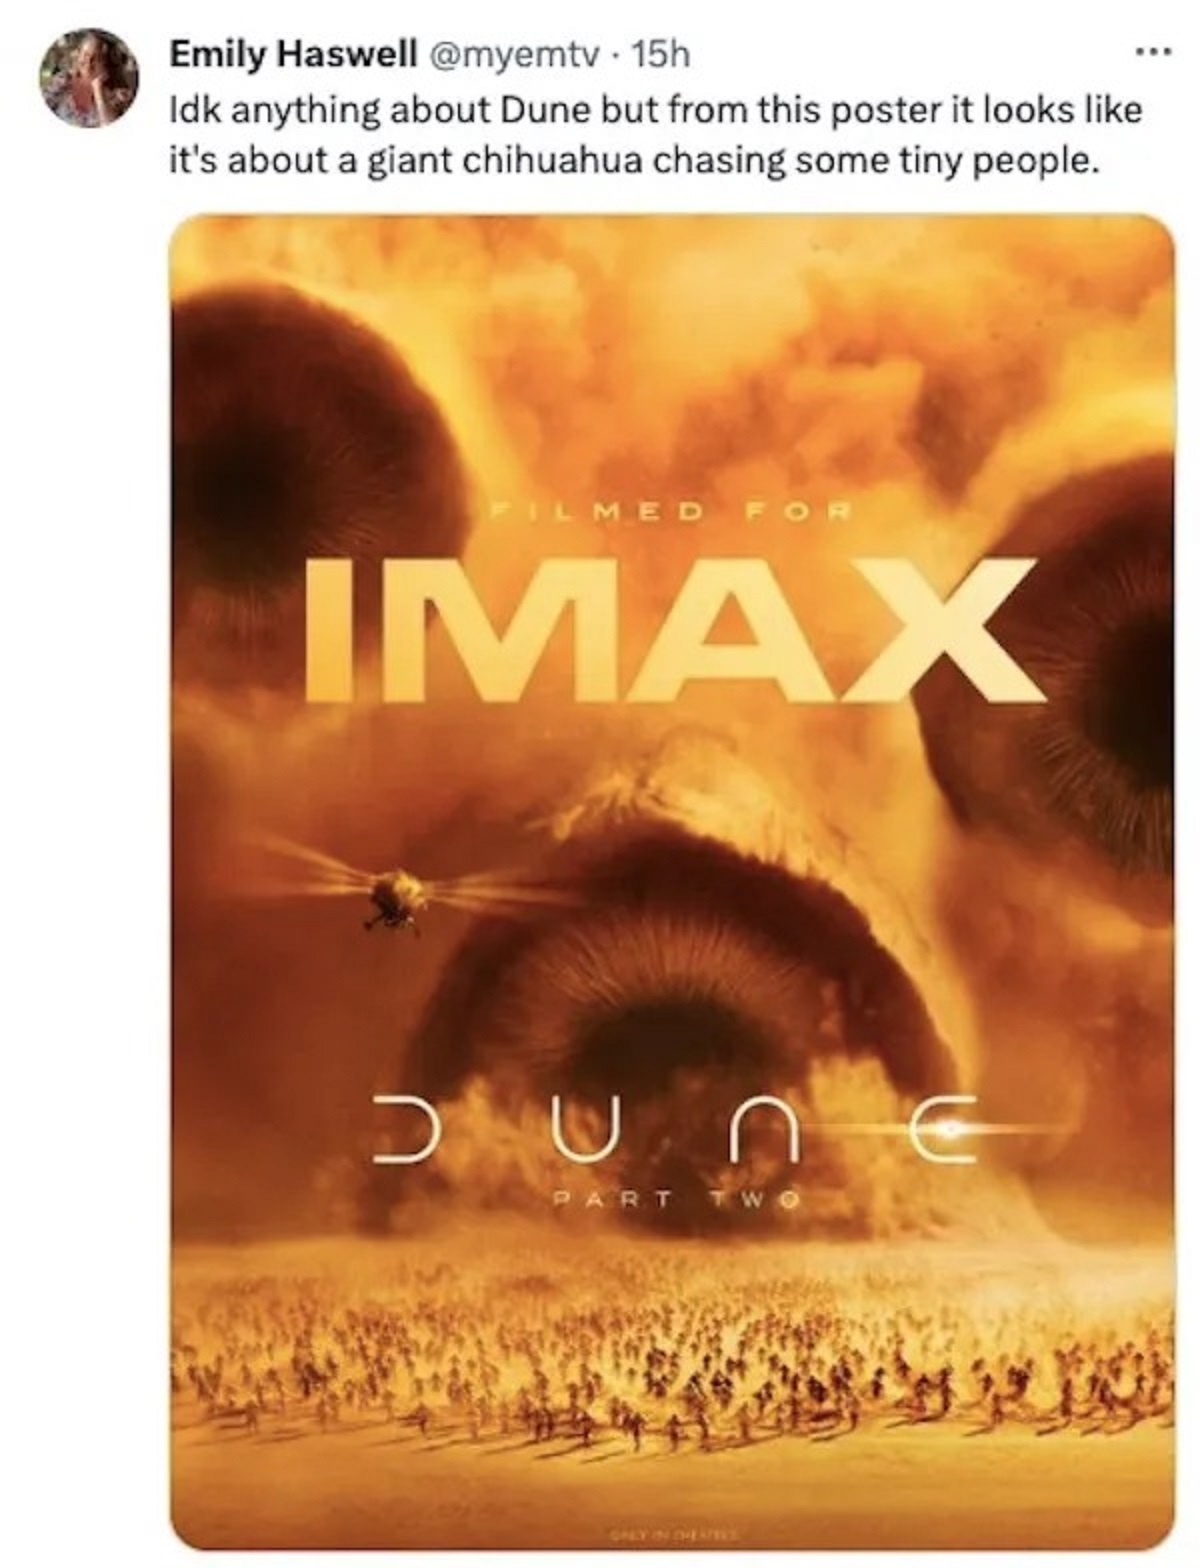 dune 2 imax - Emily Haswell 15h Idk anything about Dune but from this poster it looks it's about a giant chihuahua chasing some tiny people. Filmed For Imax Jun Part Tw Only In Theatre